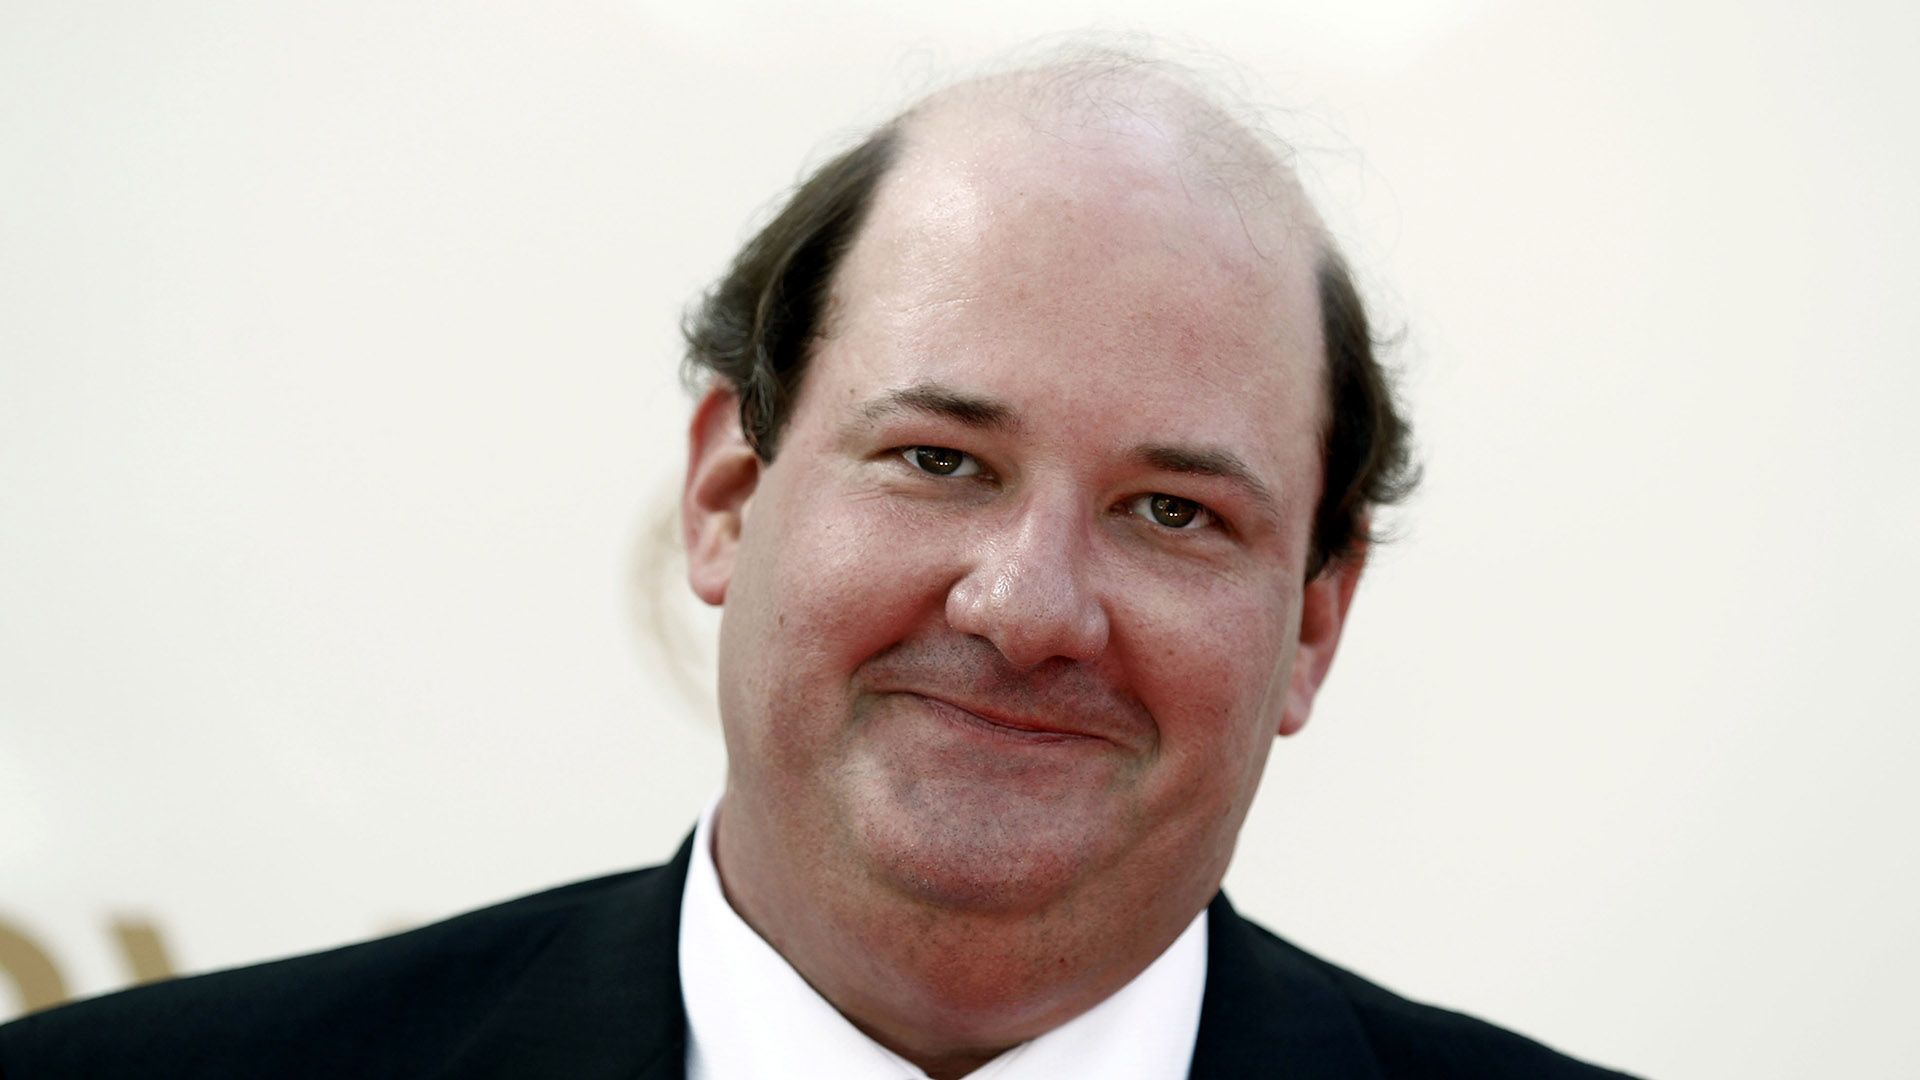 Office Night' returns for Red Wings in 2020 with 'Kevin Malone'